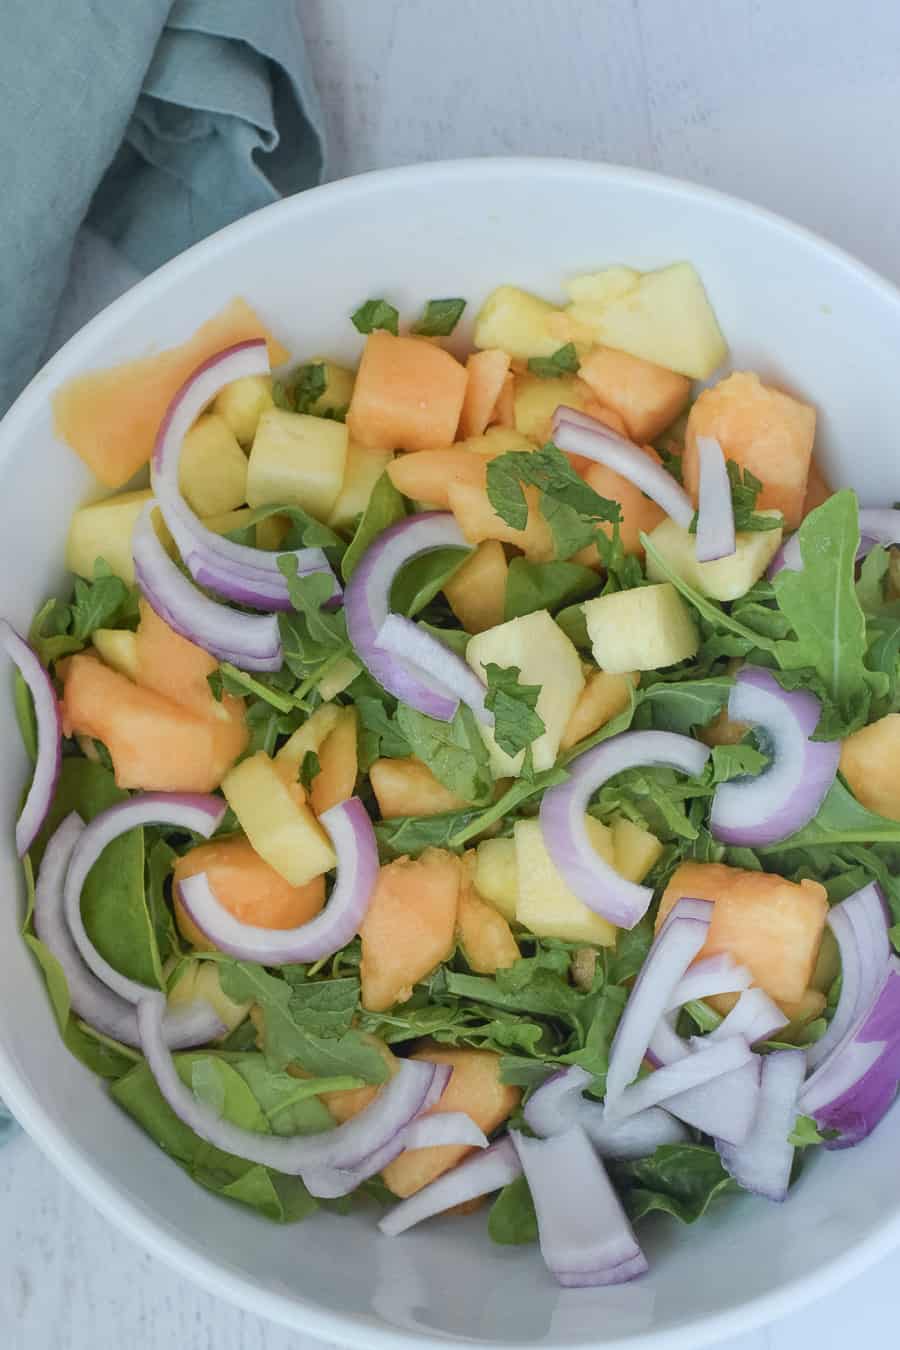 Salad with cantaloupe and pineapple and red onion over bed of arugula greens in white salad bowl